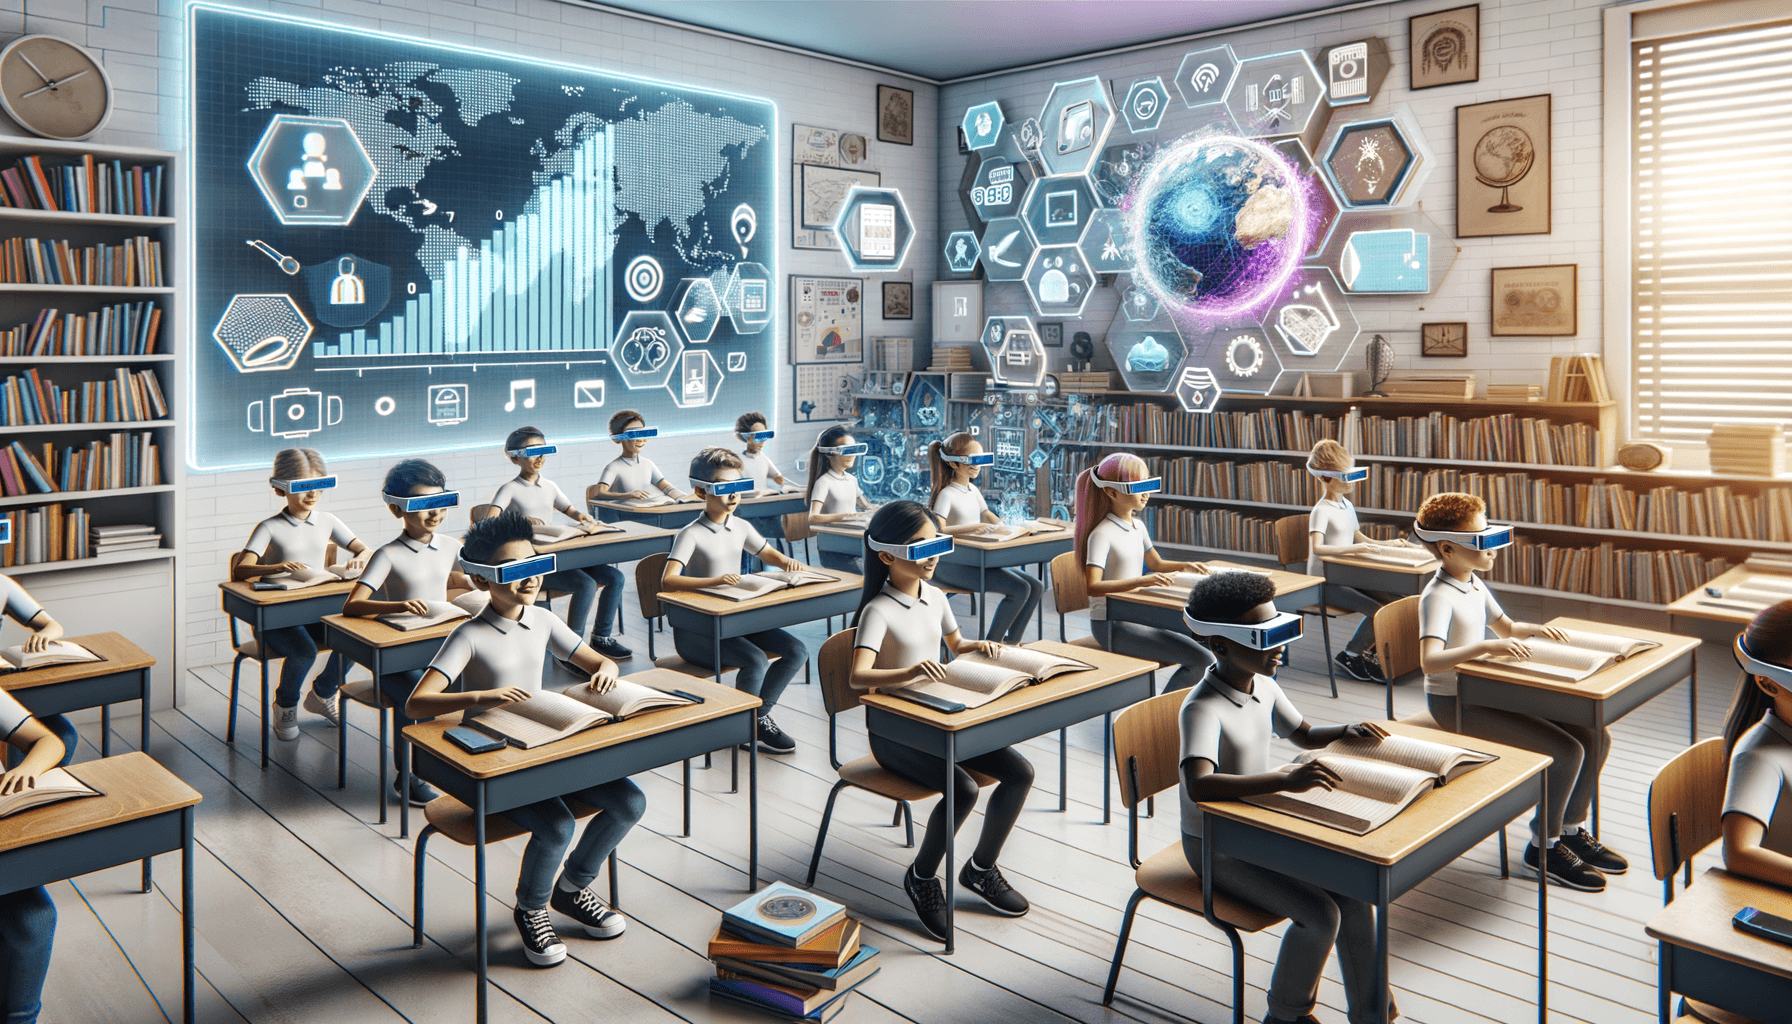 "Excited students exploring a 3D solar system via augmented reality in a futuristic classroom setting."